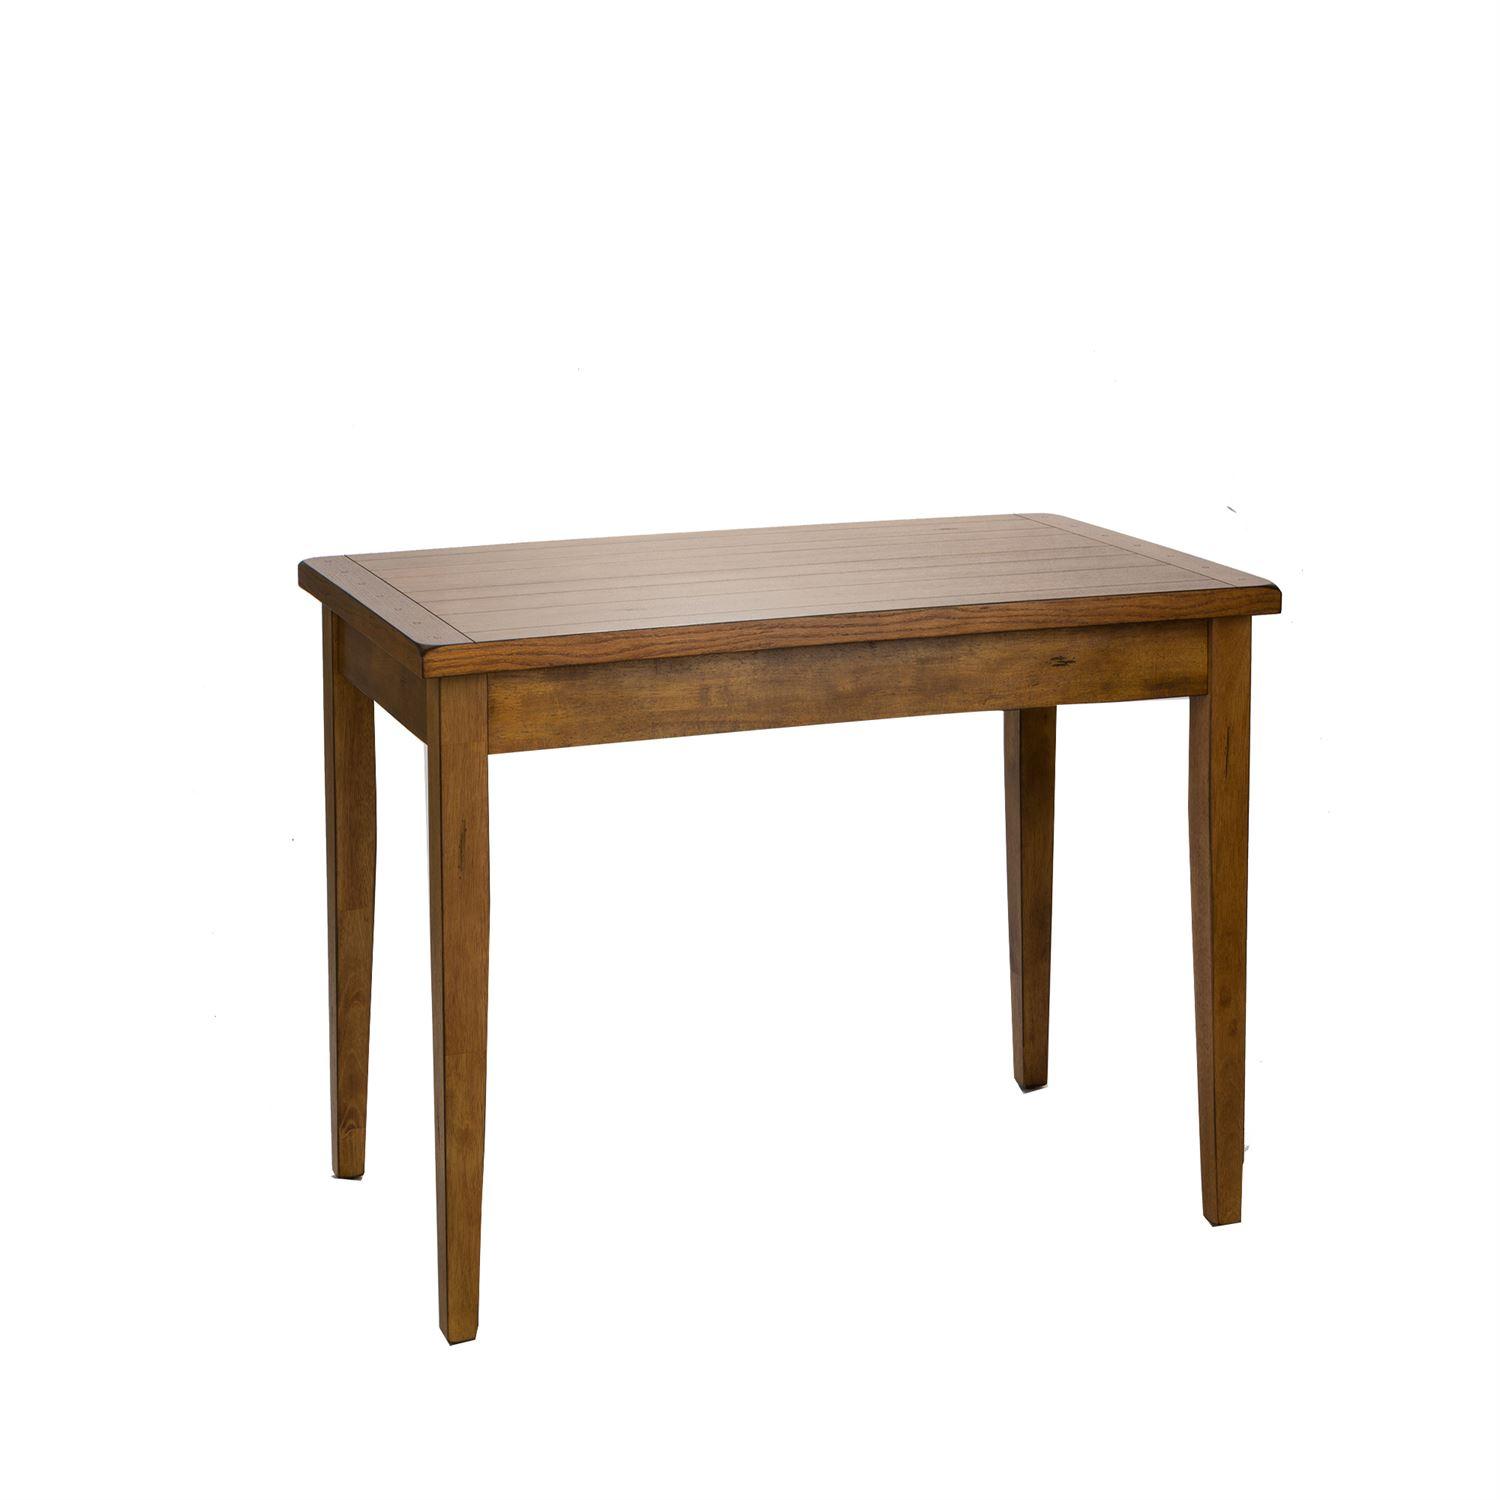   Treasures  (17-CD) Dining Table  